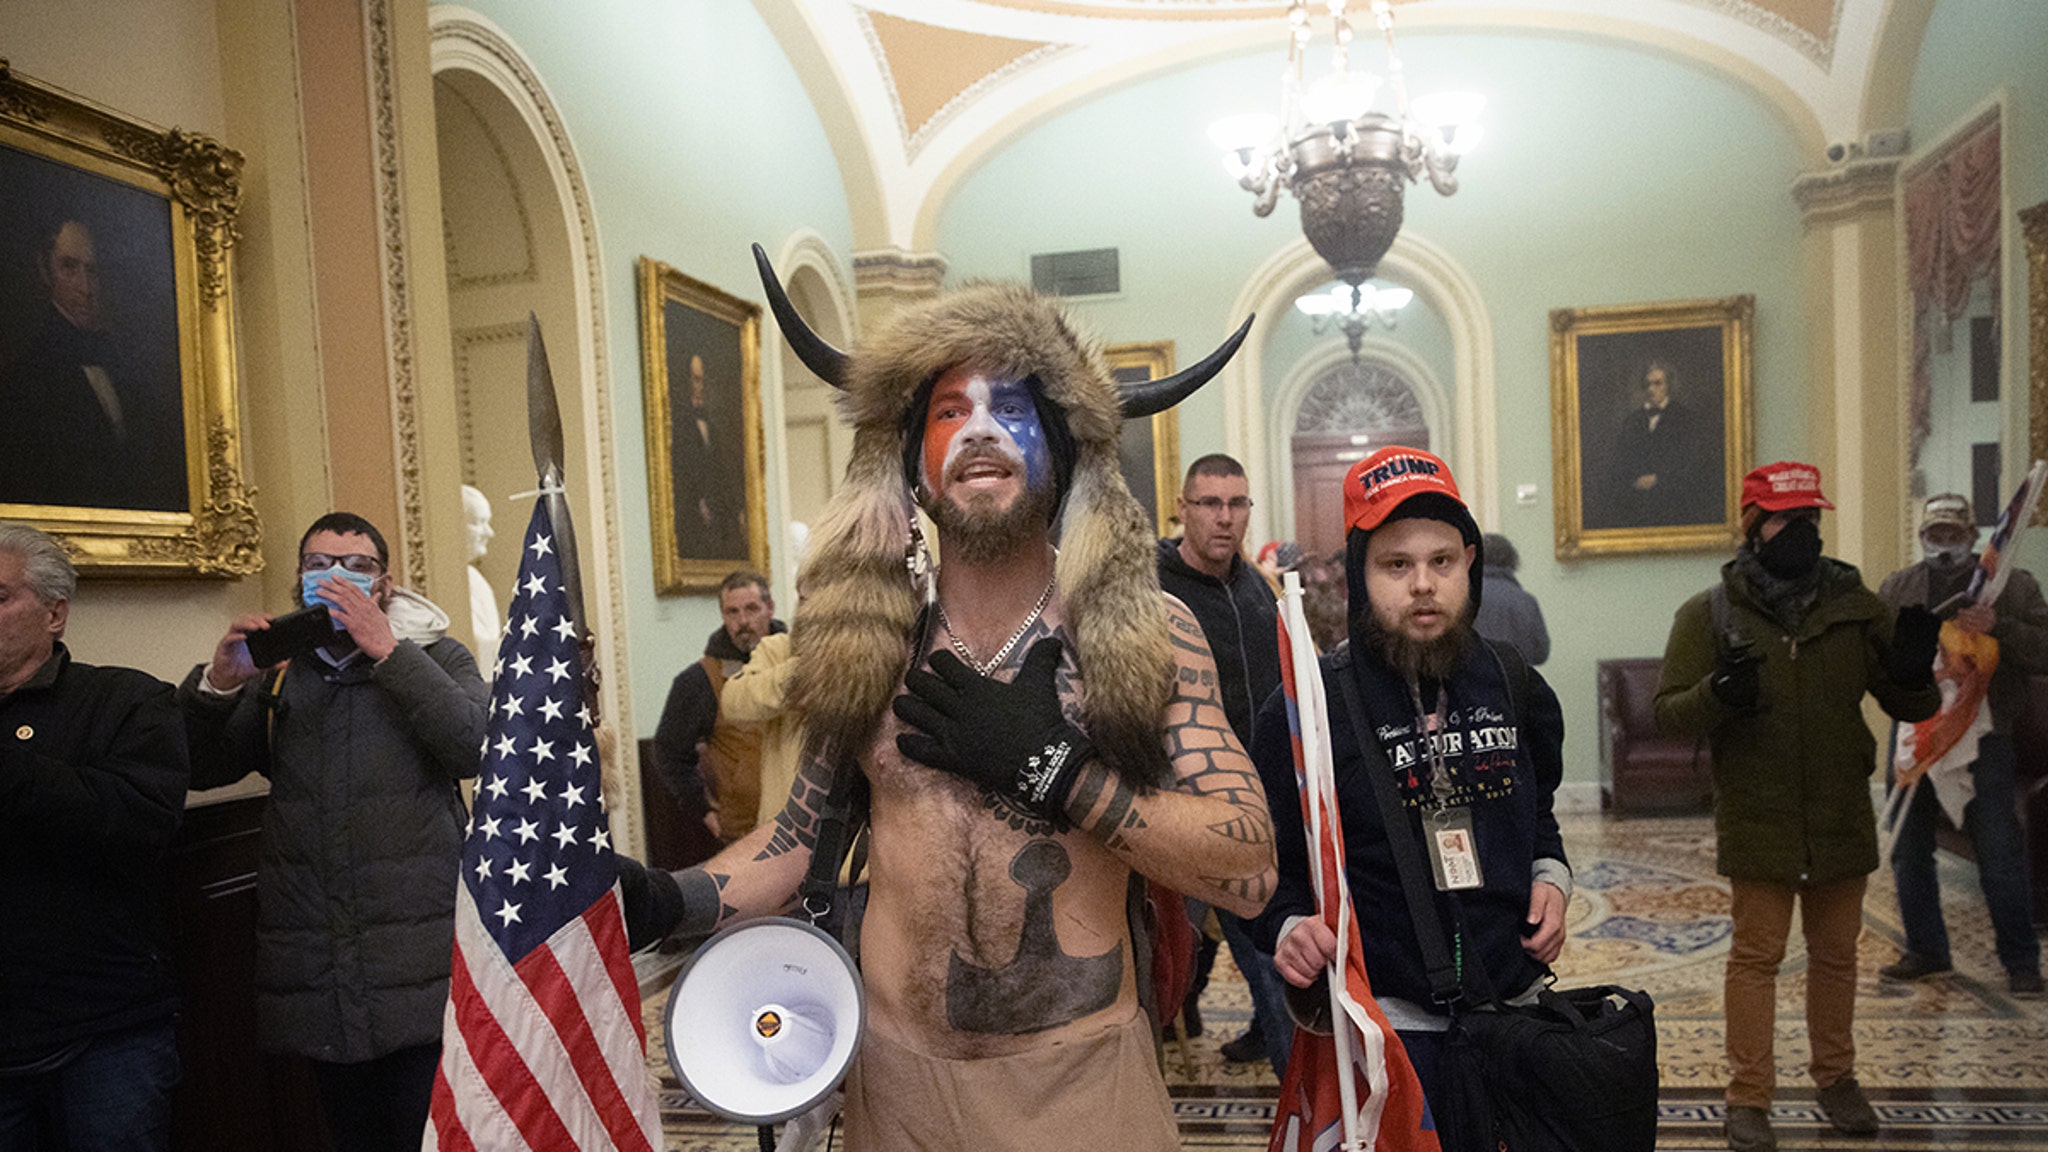 'QAnon Shaman' Gets 41 Months in Prison Over Capitol Riot